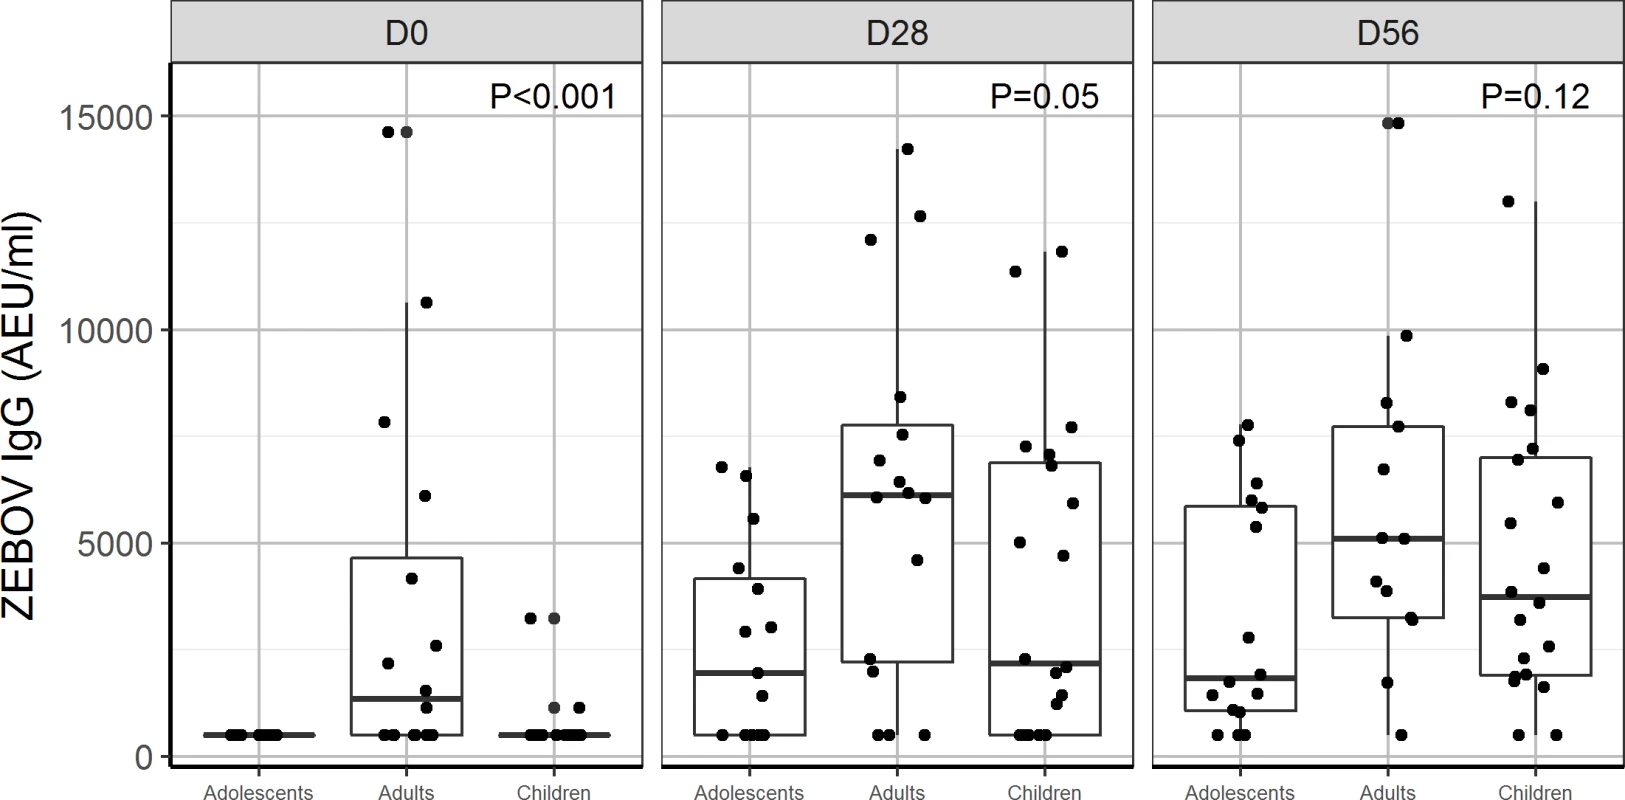 Antibody responses to whole-virion ELISA (AEU/ml) by age group: Comparison of geometric mean concentration of IgG antibodies for children, adolescents, and adults vaccinated with the 2 × 10<sup>7</sup> PFU dose at day 0, 28, and 56.